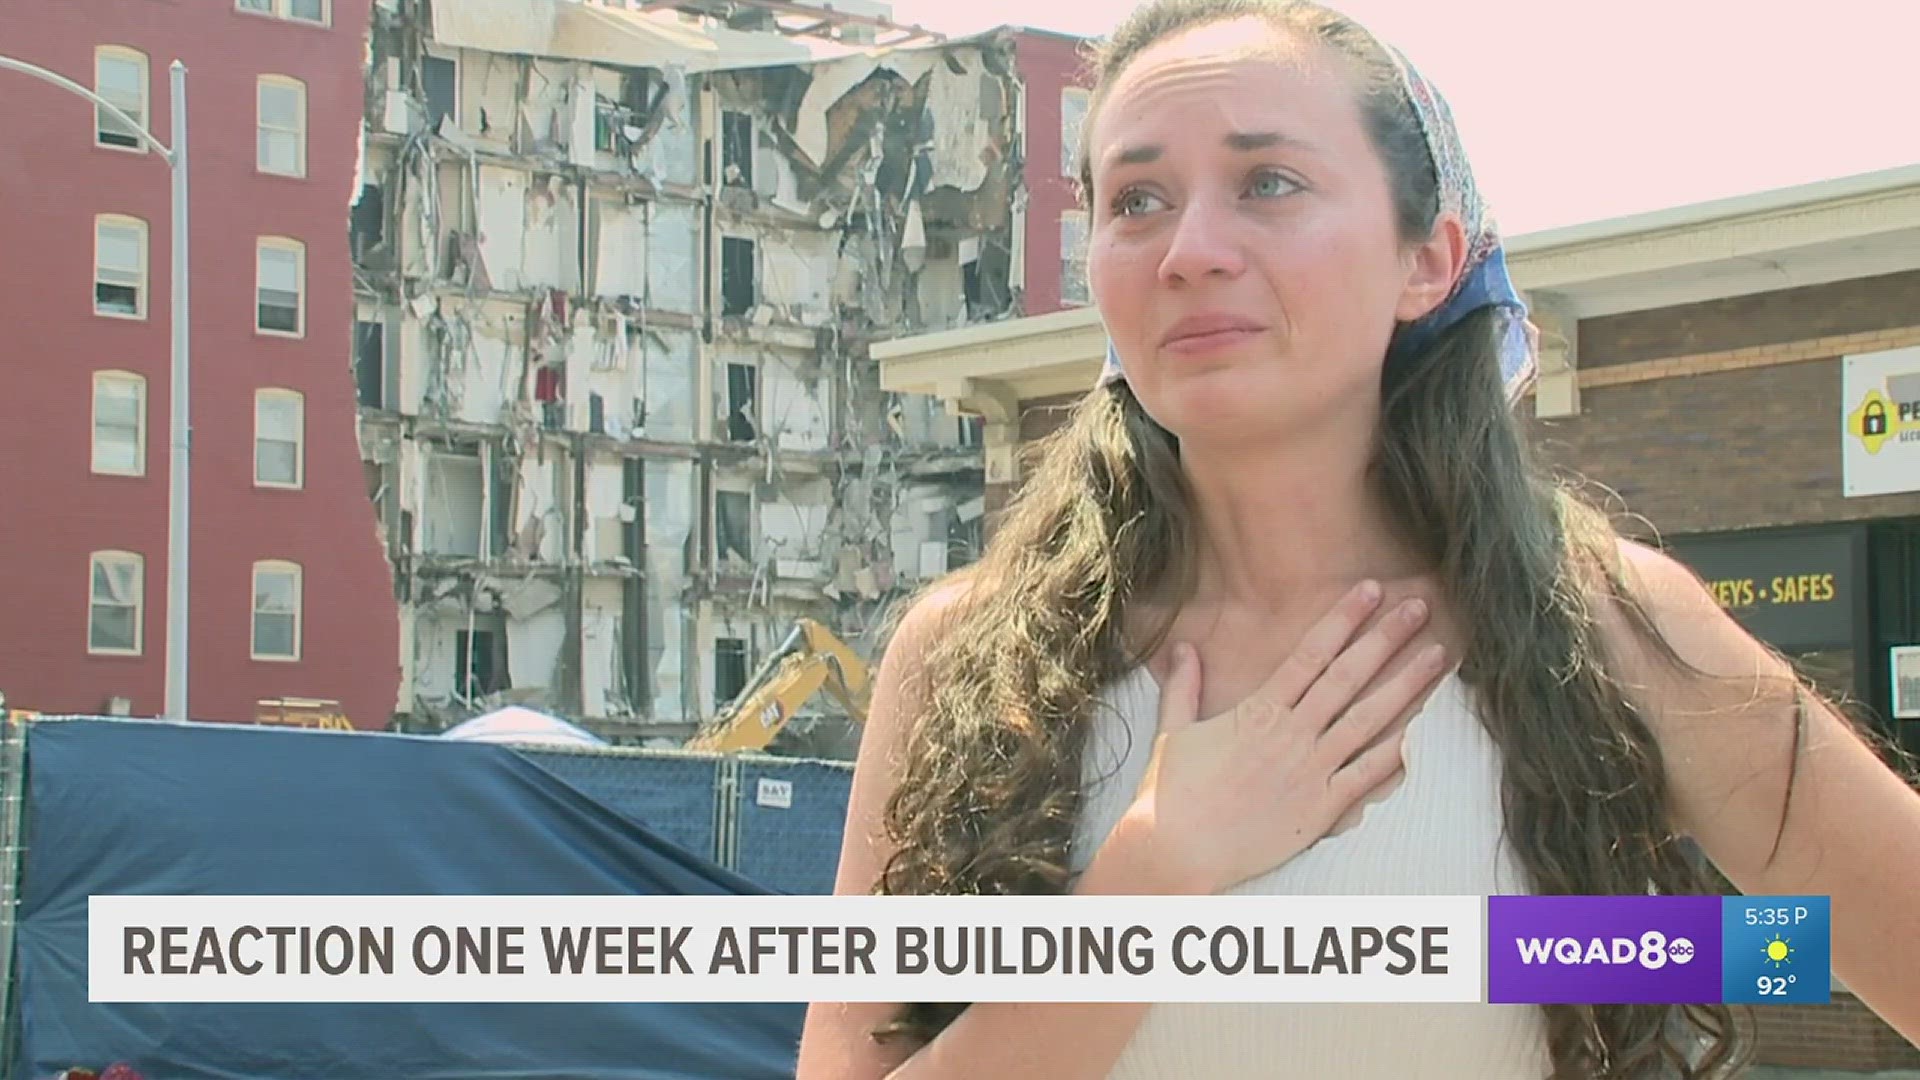 Savannah Strandin, 28, owns a business below the apartments. She was out of state when it collapsed. She first saw the aftermath with her own eyes six days later.